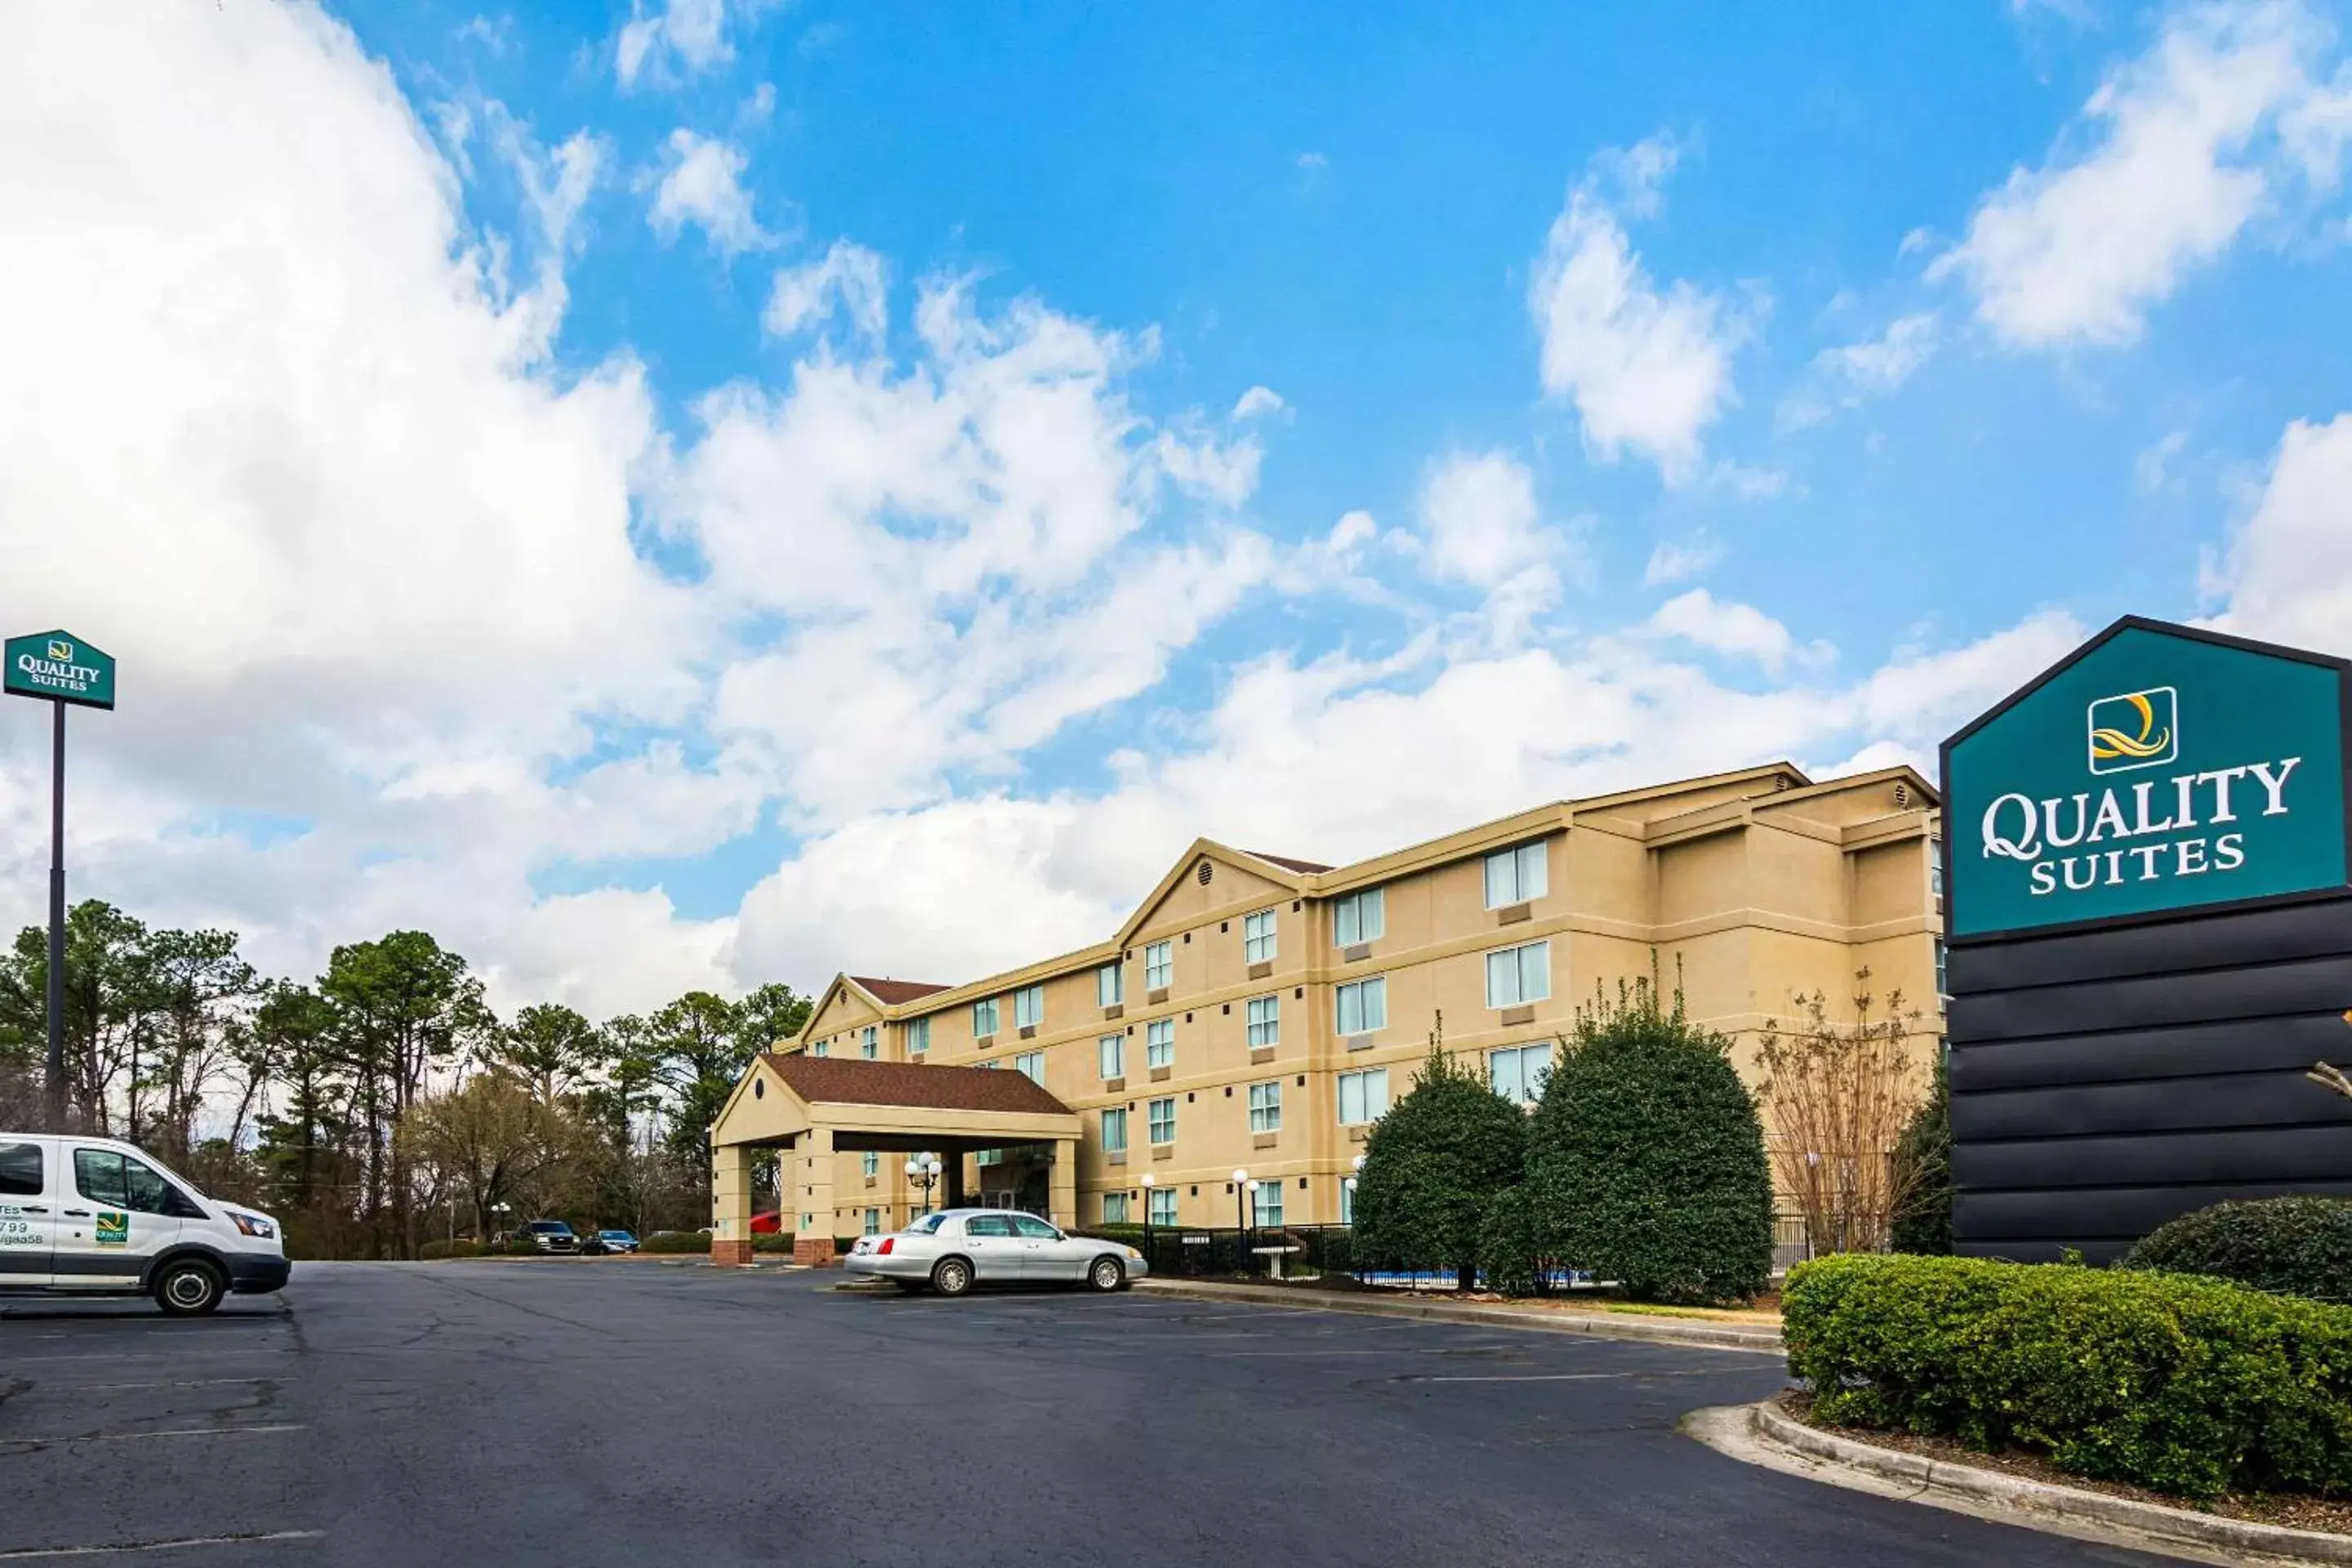 Property building in Quality Suites Atlanta Airport East